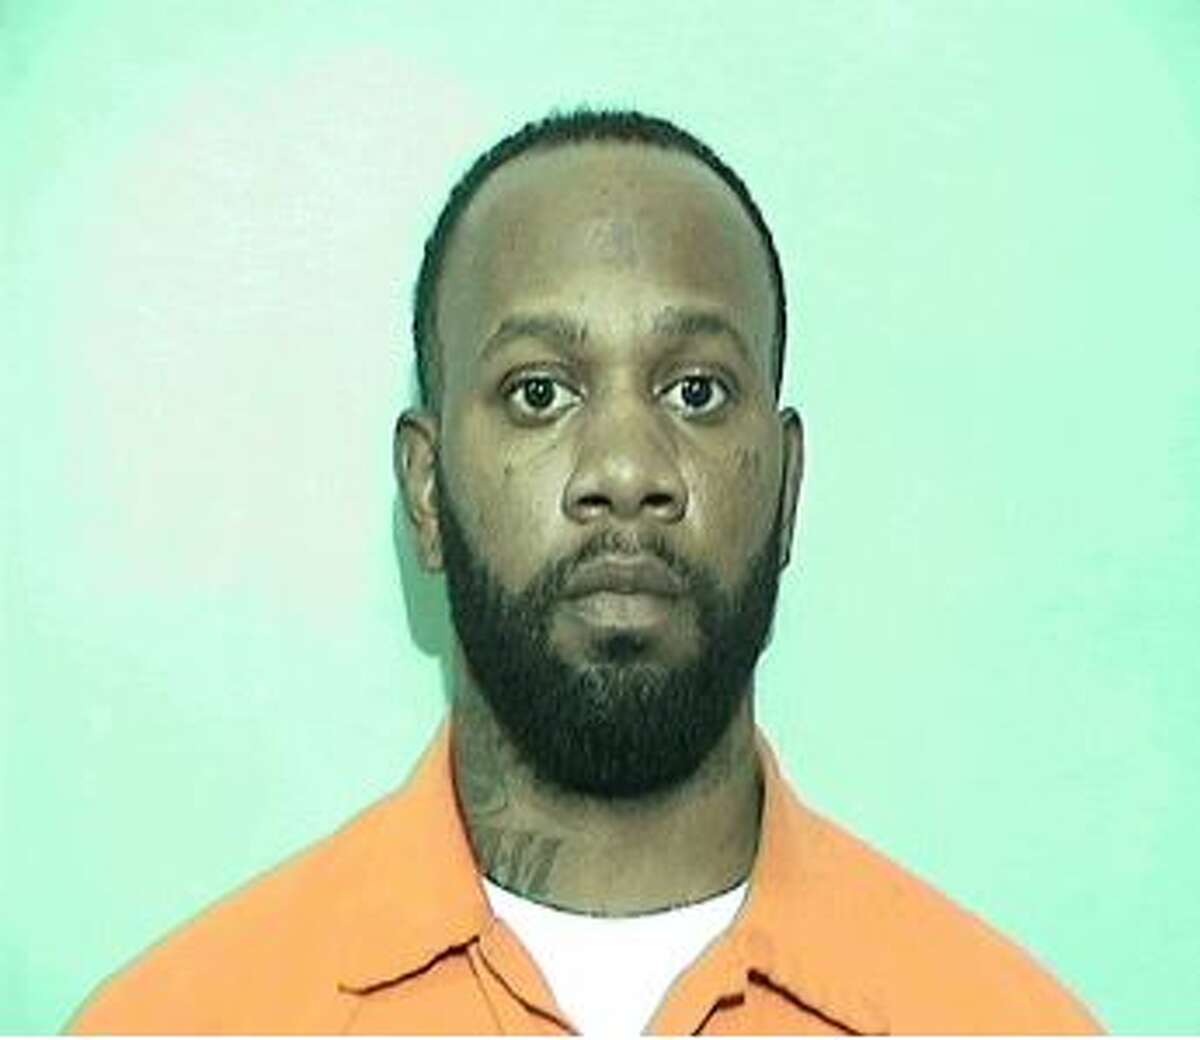 Anthony Robinson, 32, was charged with federal possession with intent to distribute controlled substances after an operation in Toledo, Ohio.